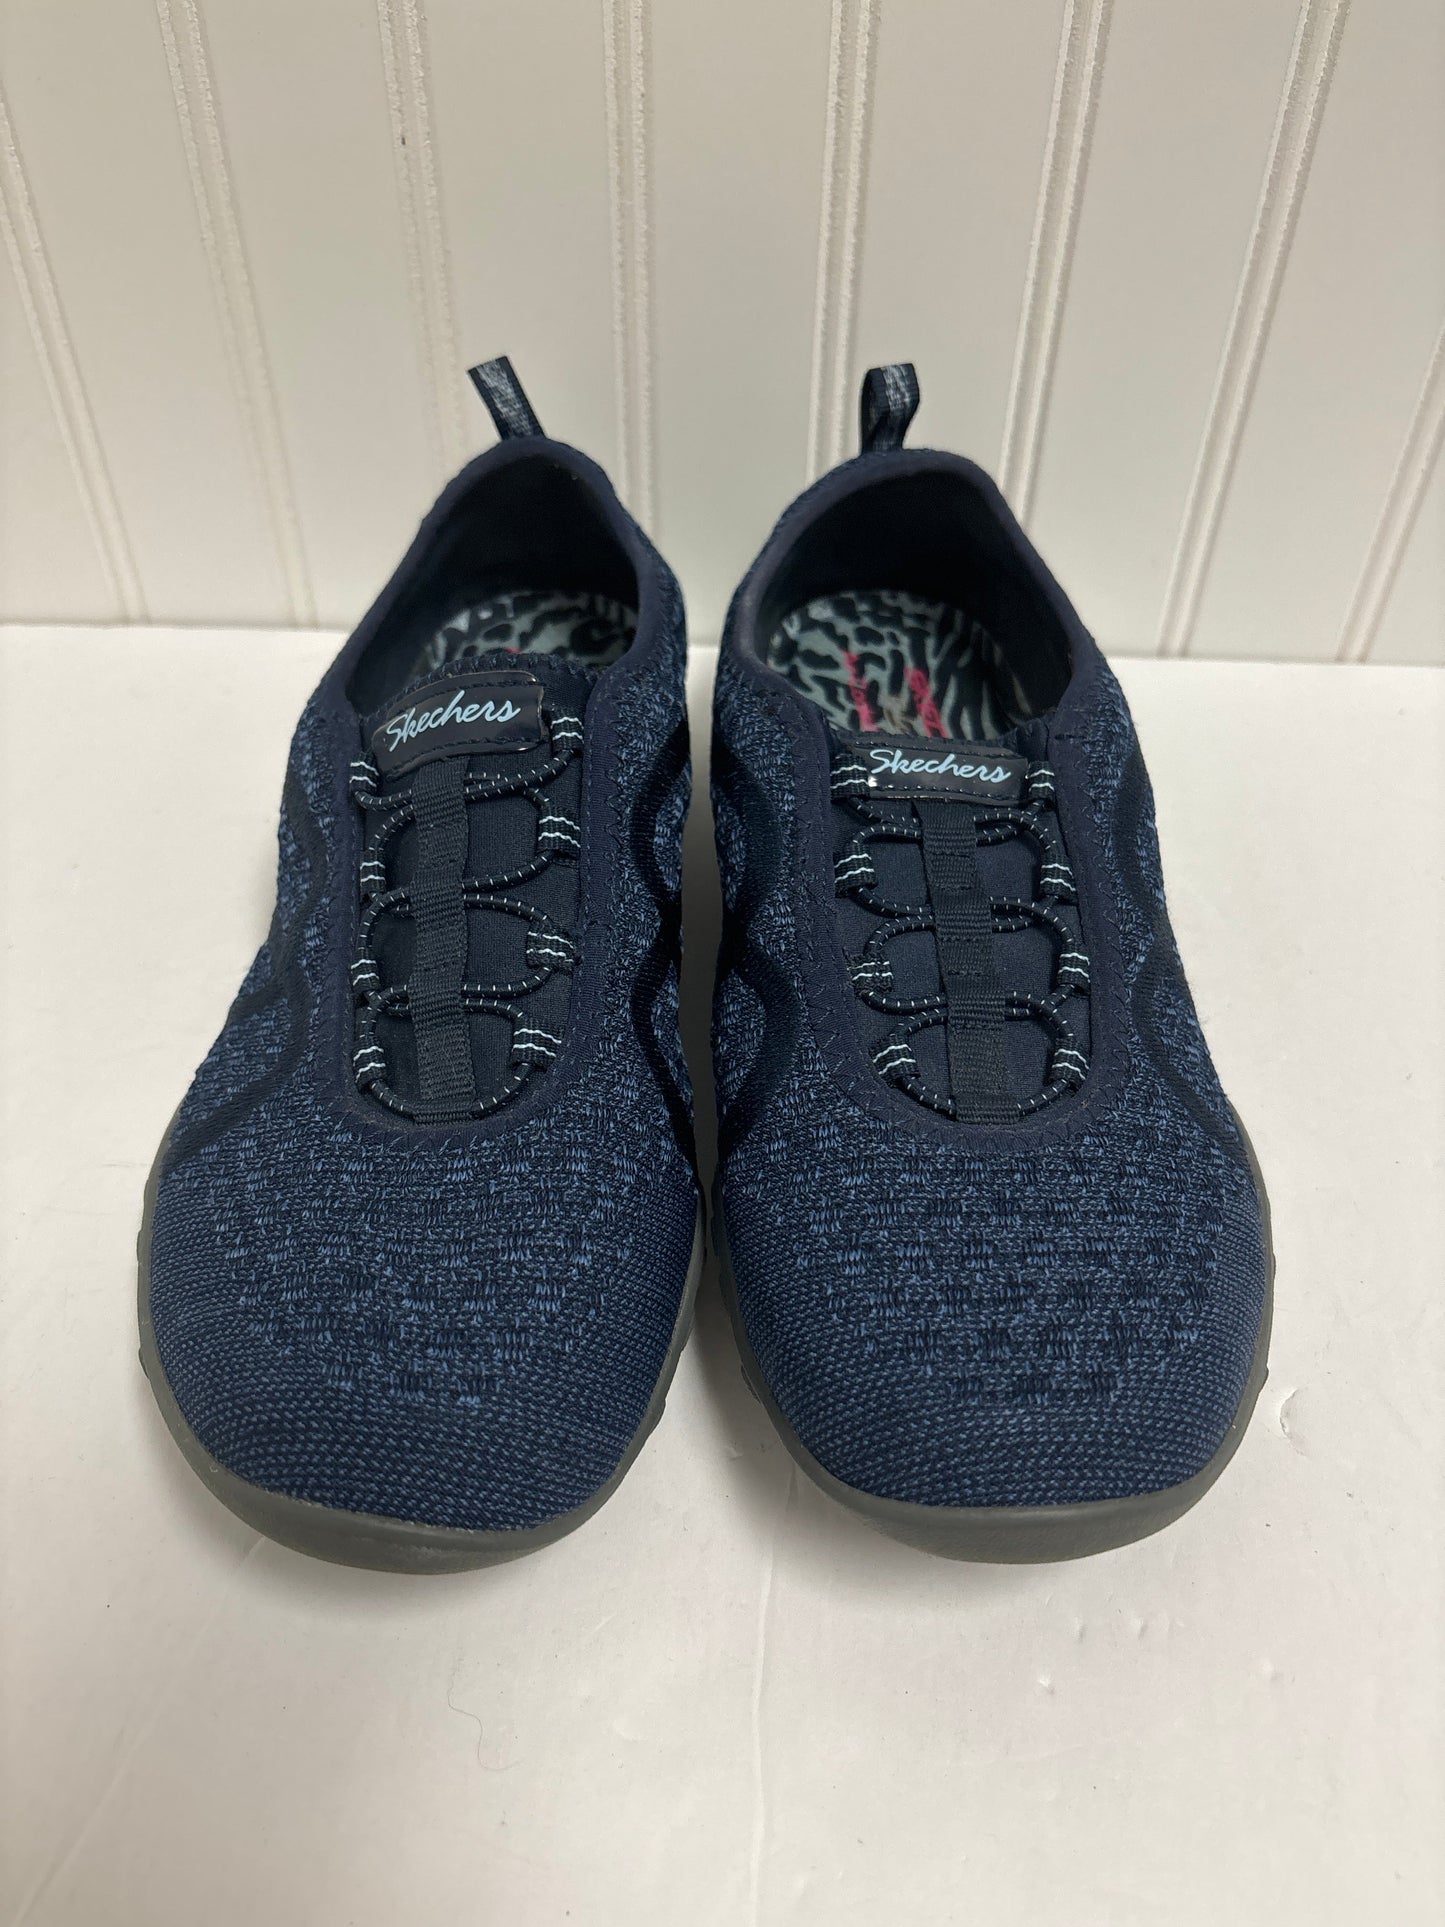 Navy Shoes Sneakers Skechers, Size 8.5